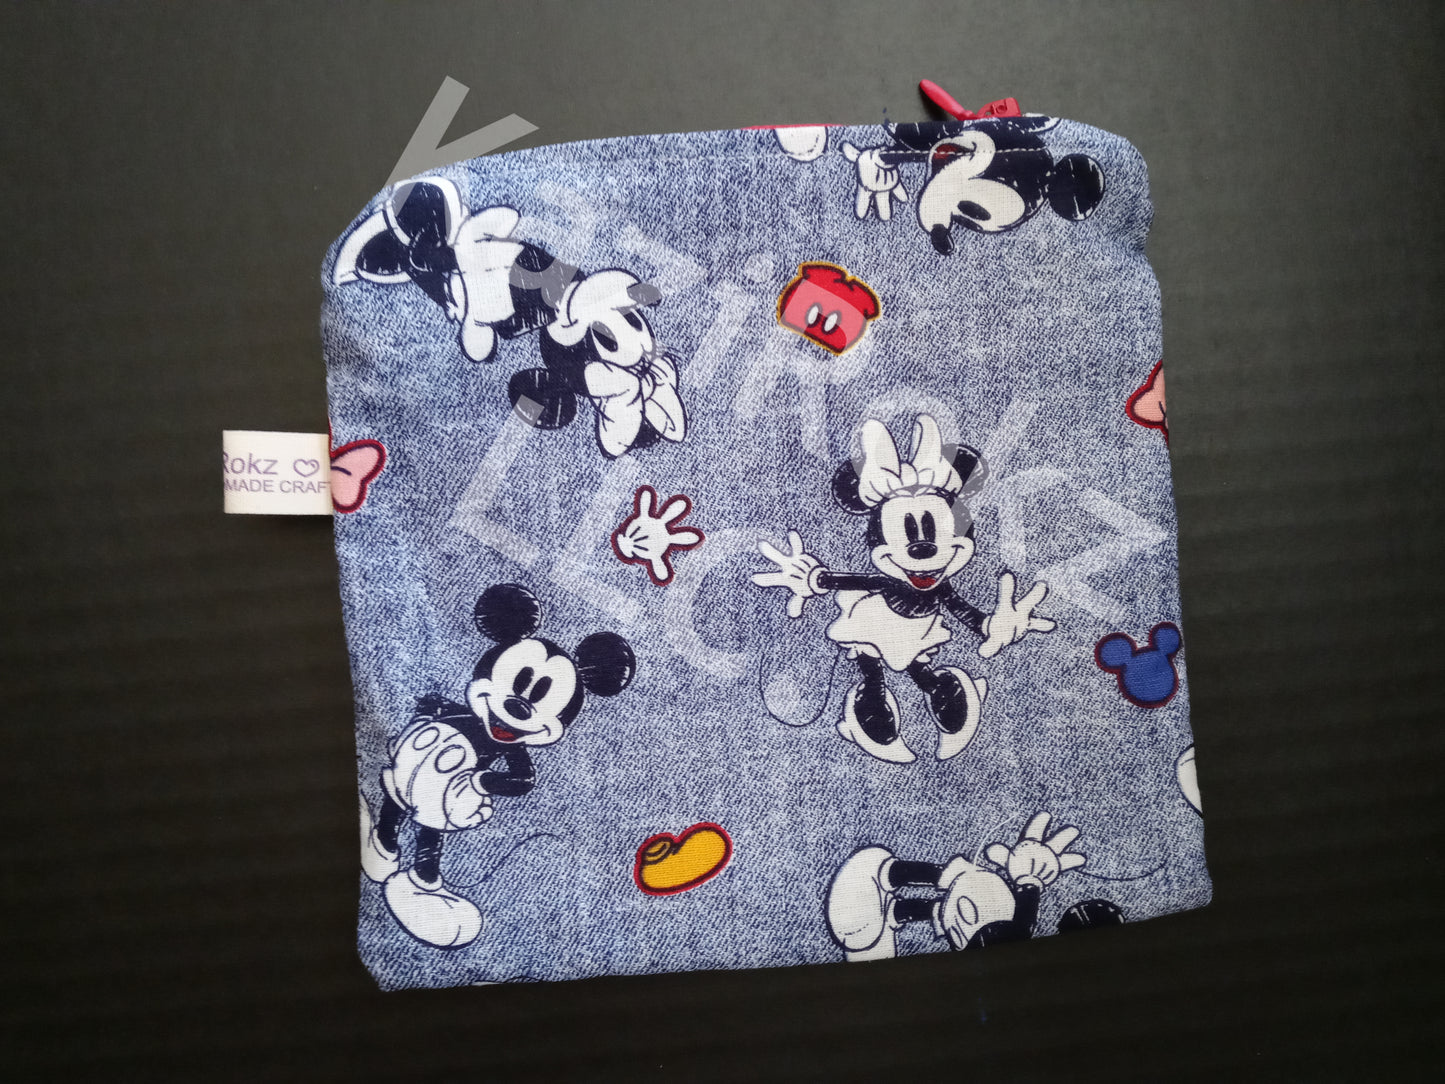 Disney Themed Mickey & Minnie Mouse Pouches